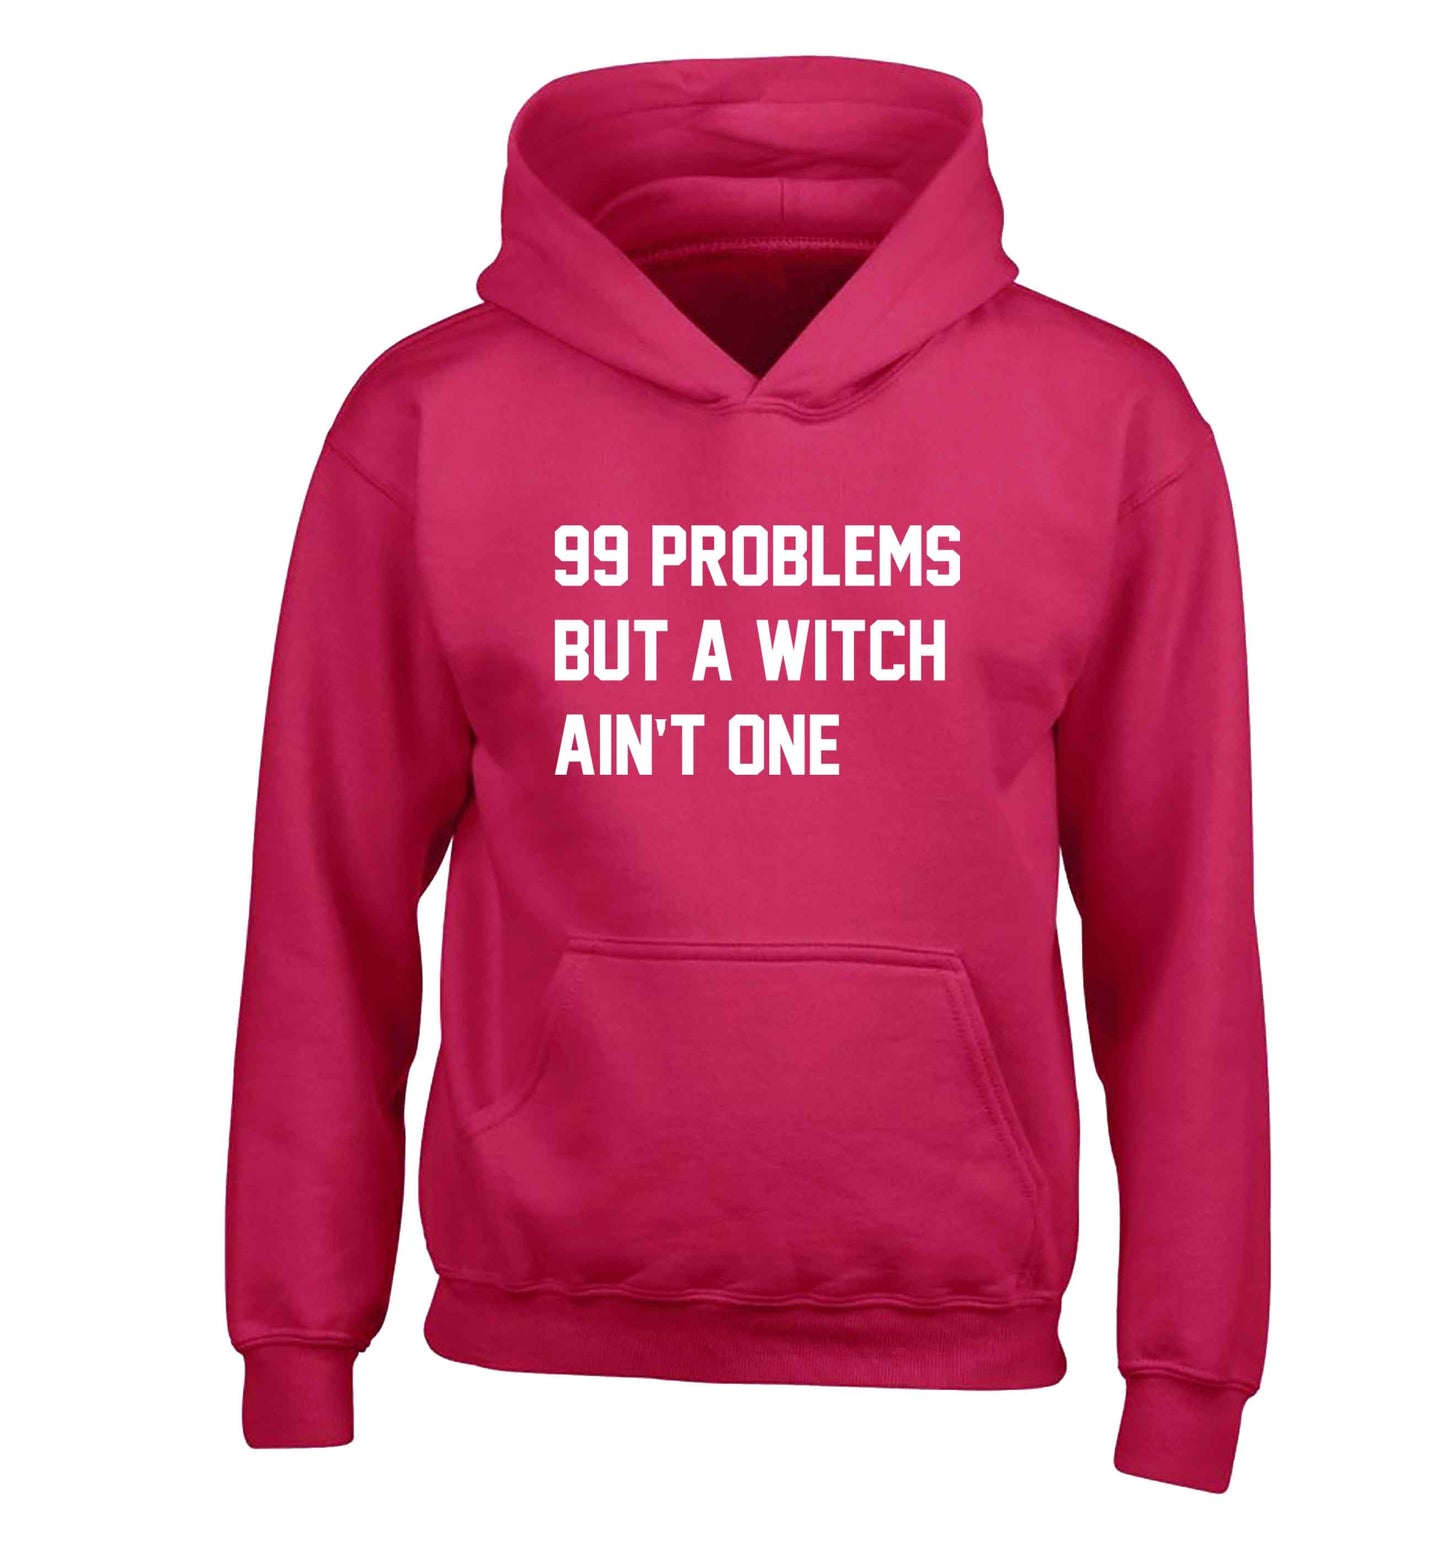 99 Problems but a witch aint one children's pink hoodie 12-13 Years